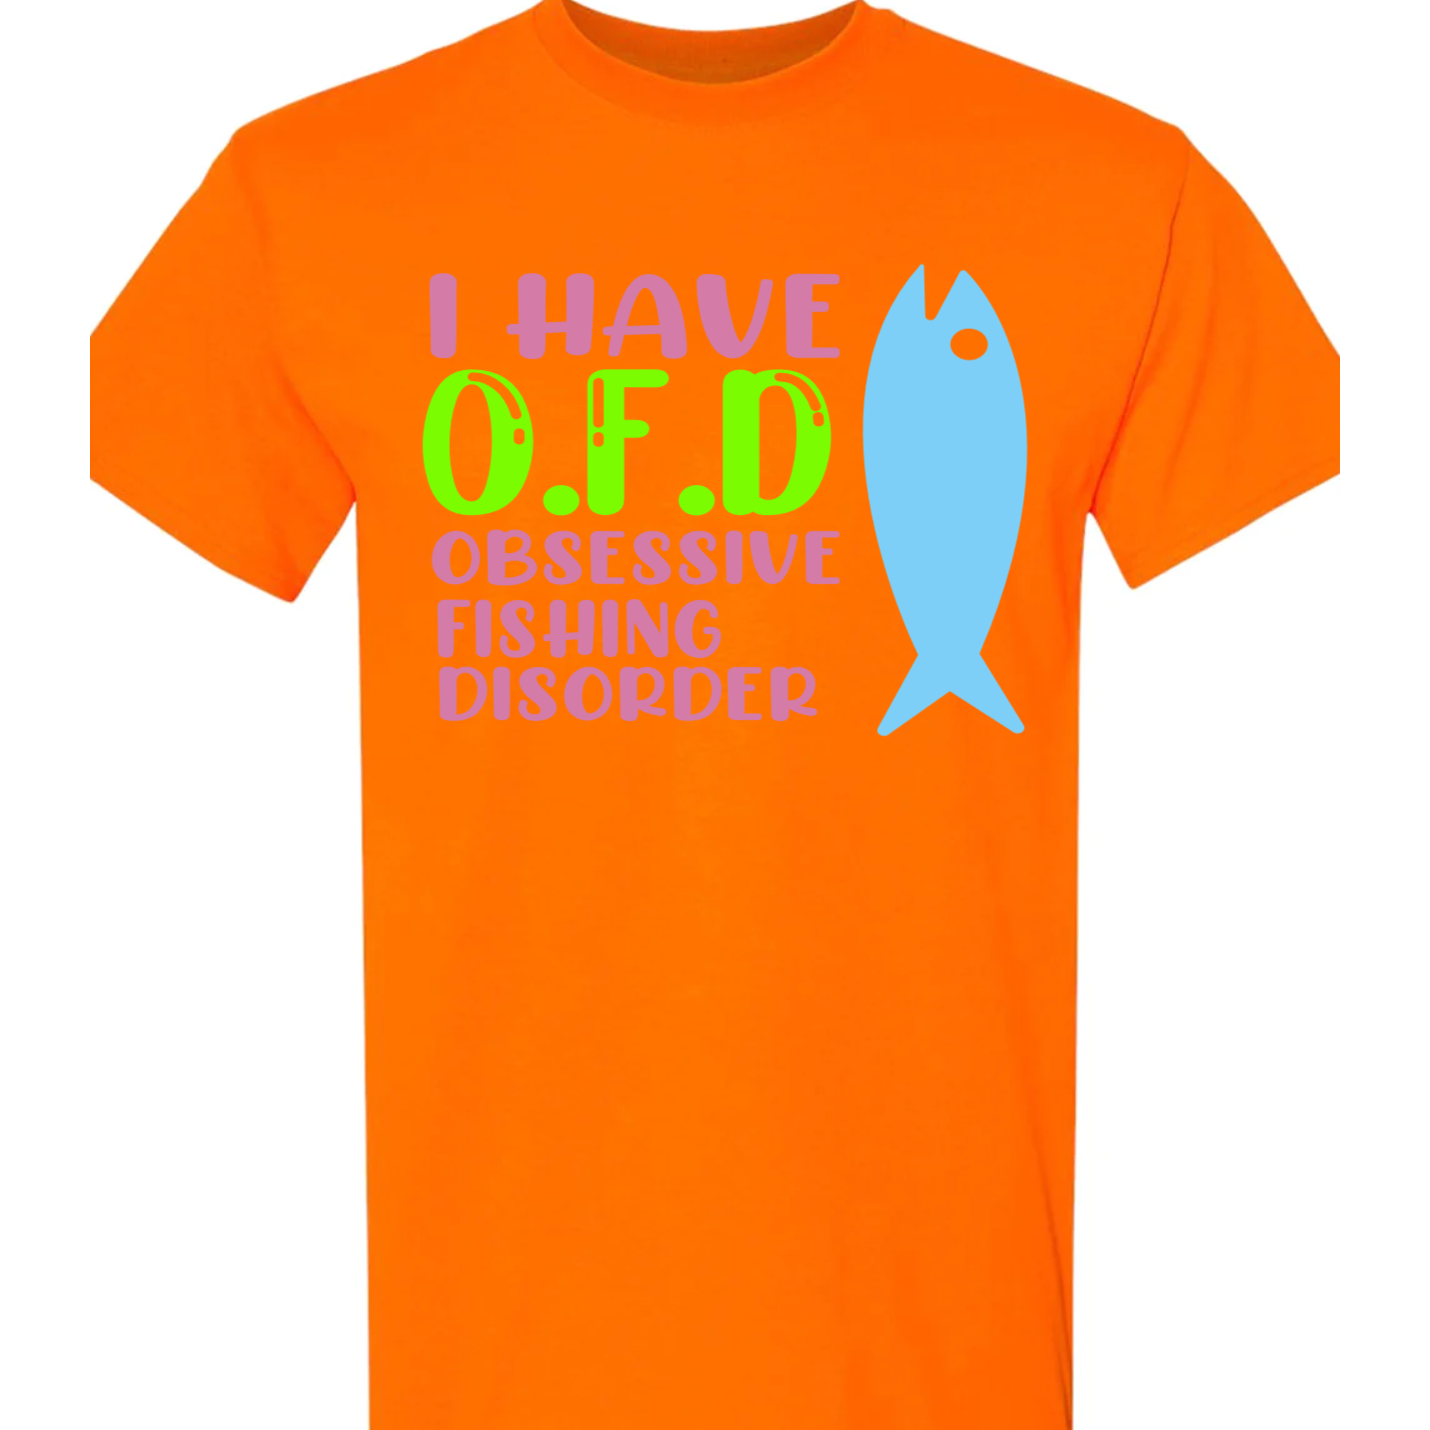 Obsessive Fishing Disorder Vinyl Graphic for Shirts